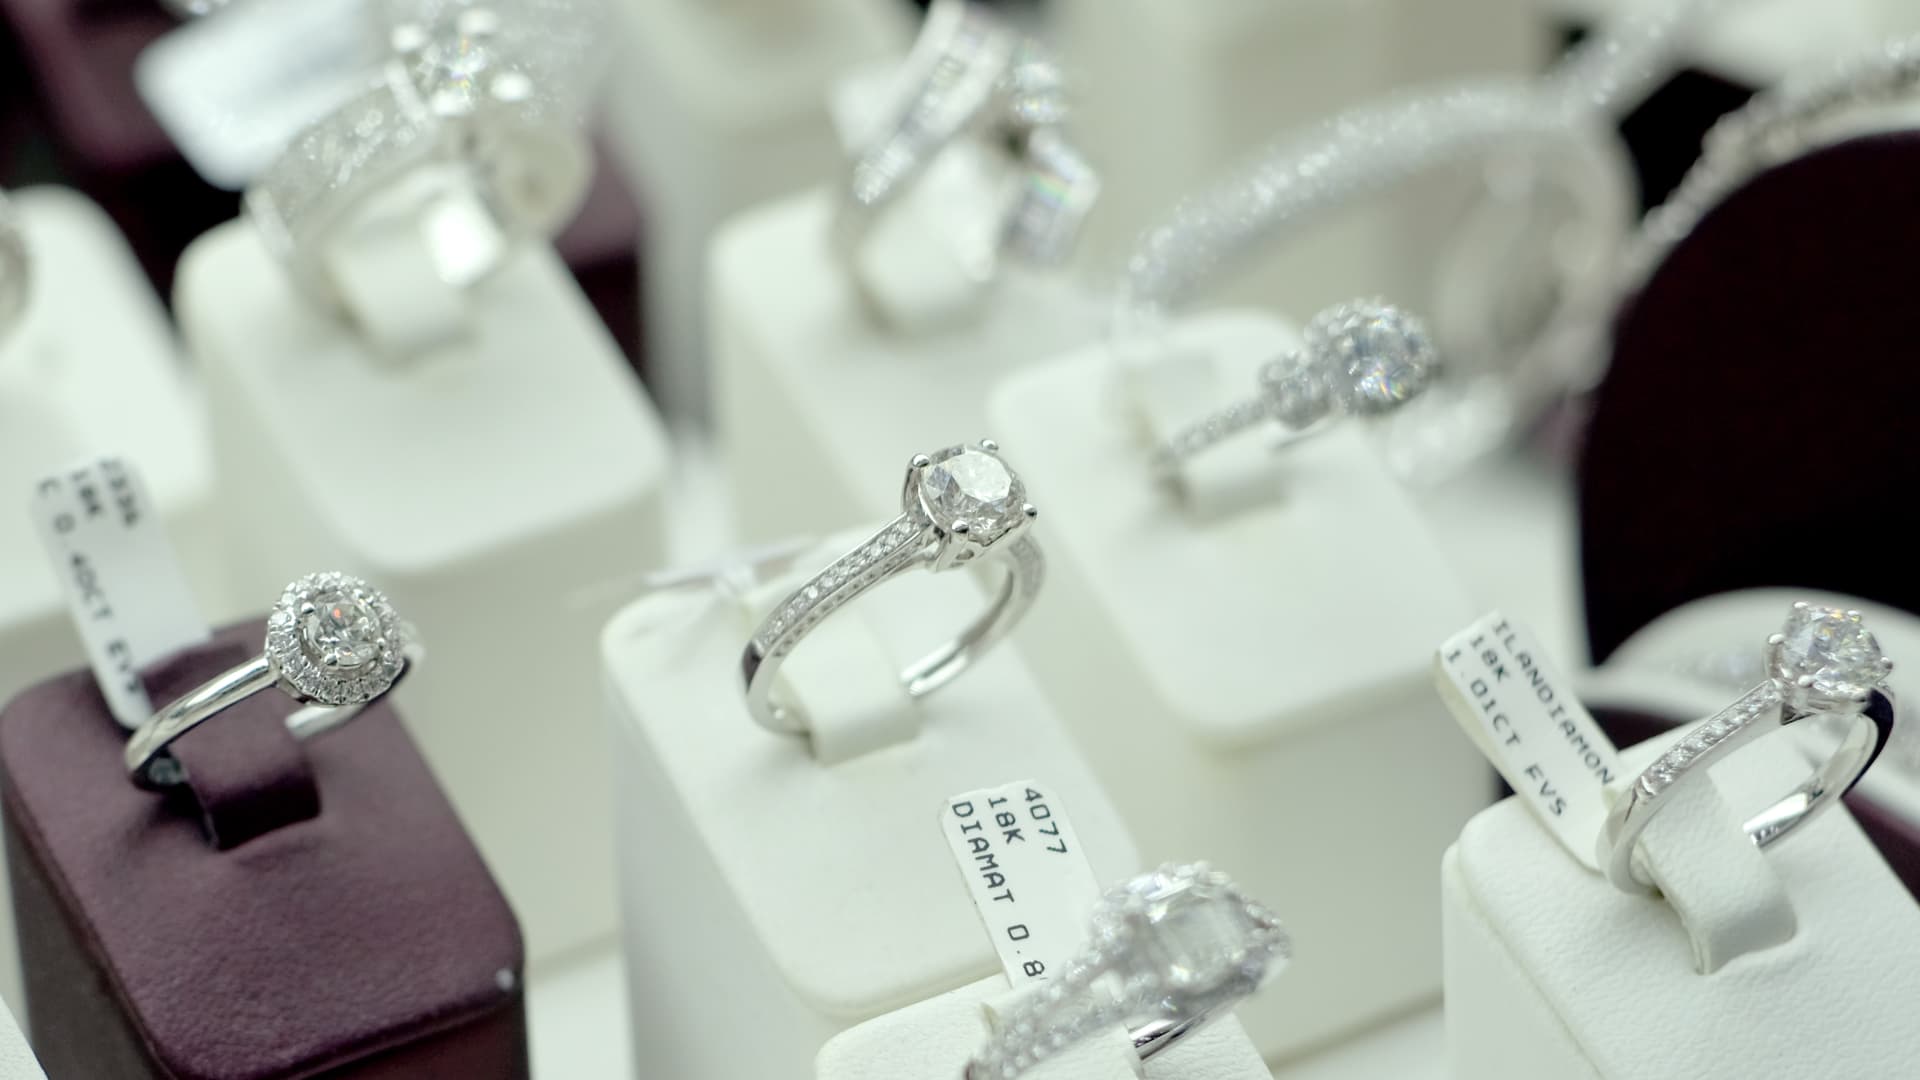 Diamond prices have fallen 18% from their peak, and analysts predict more pain